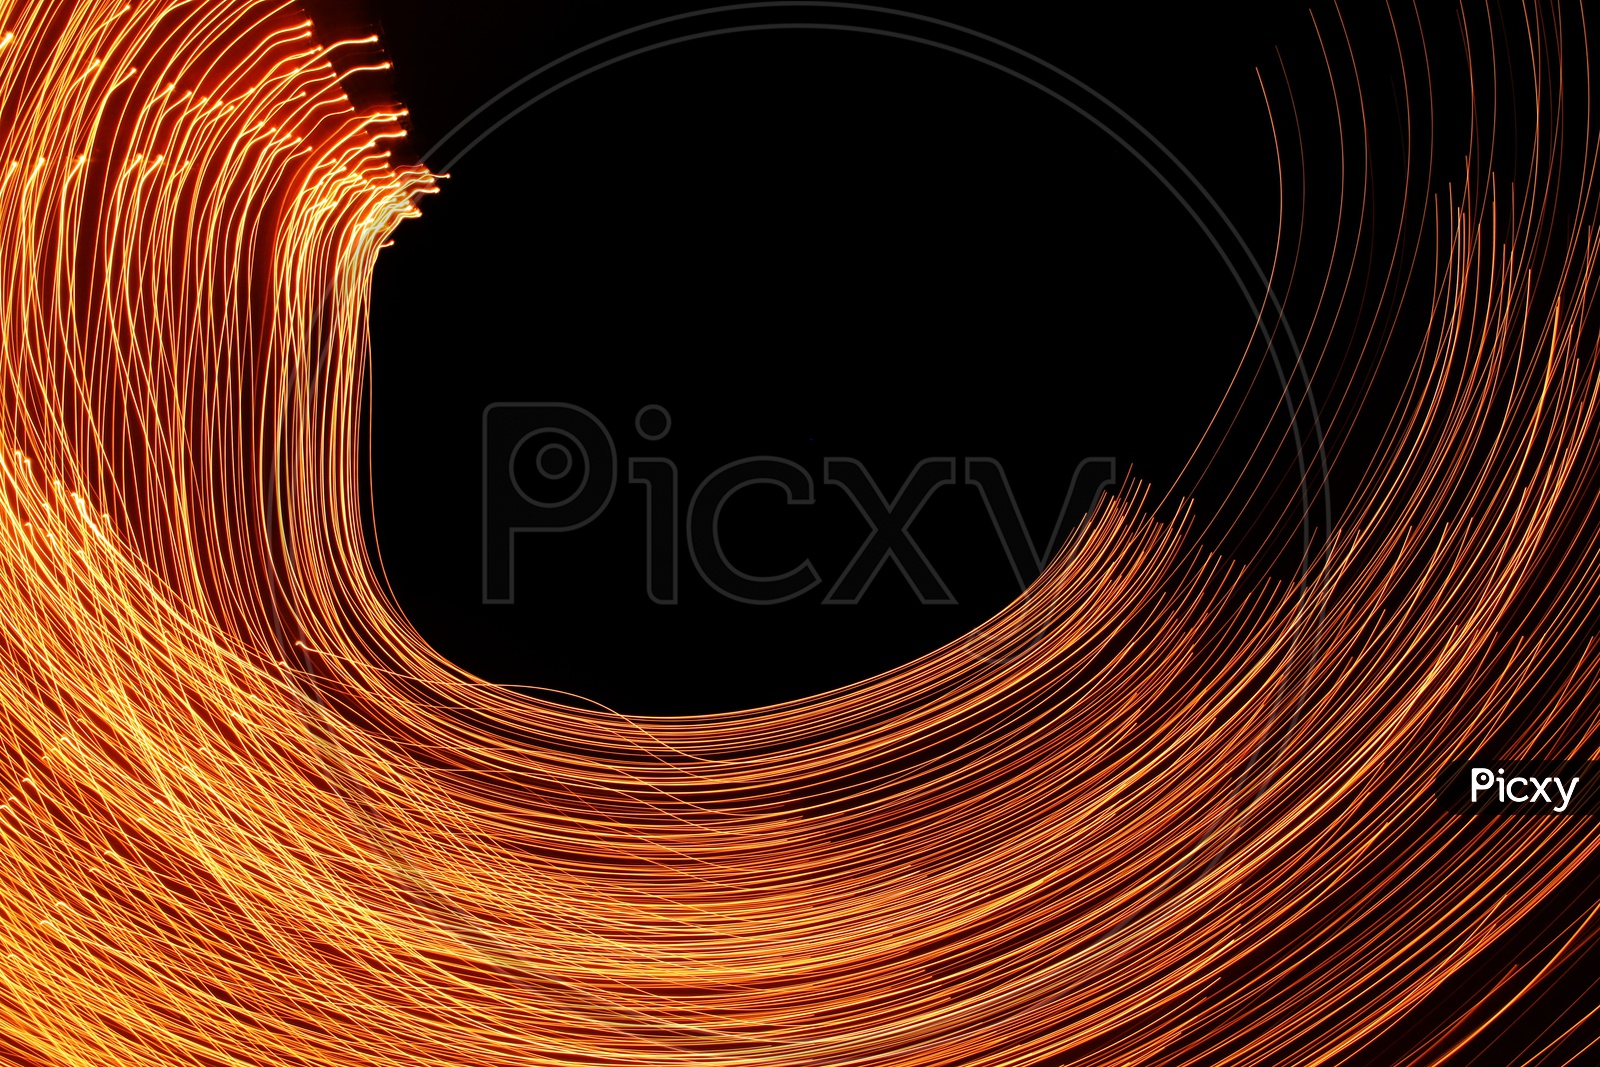 Abstract light trail forming semi circle pattern with black background